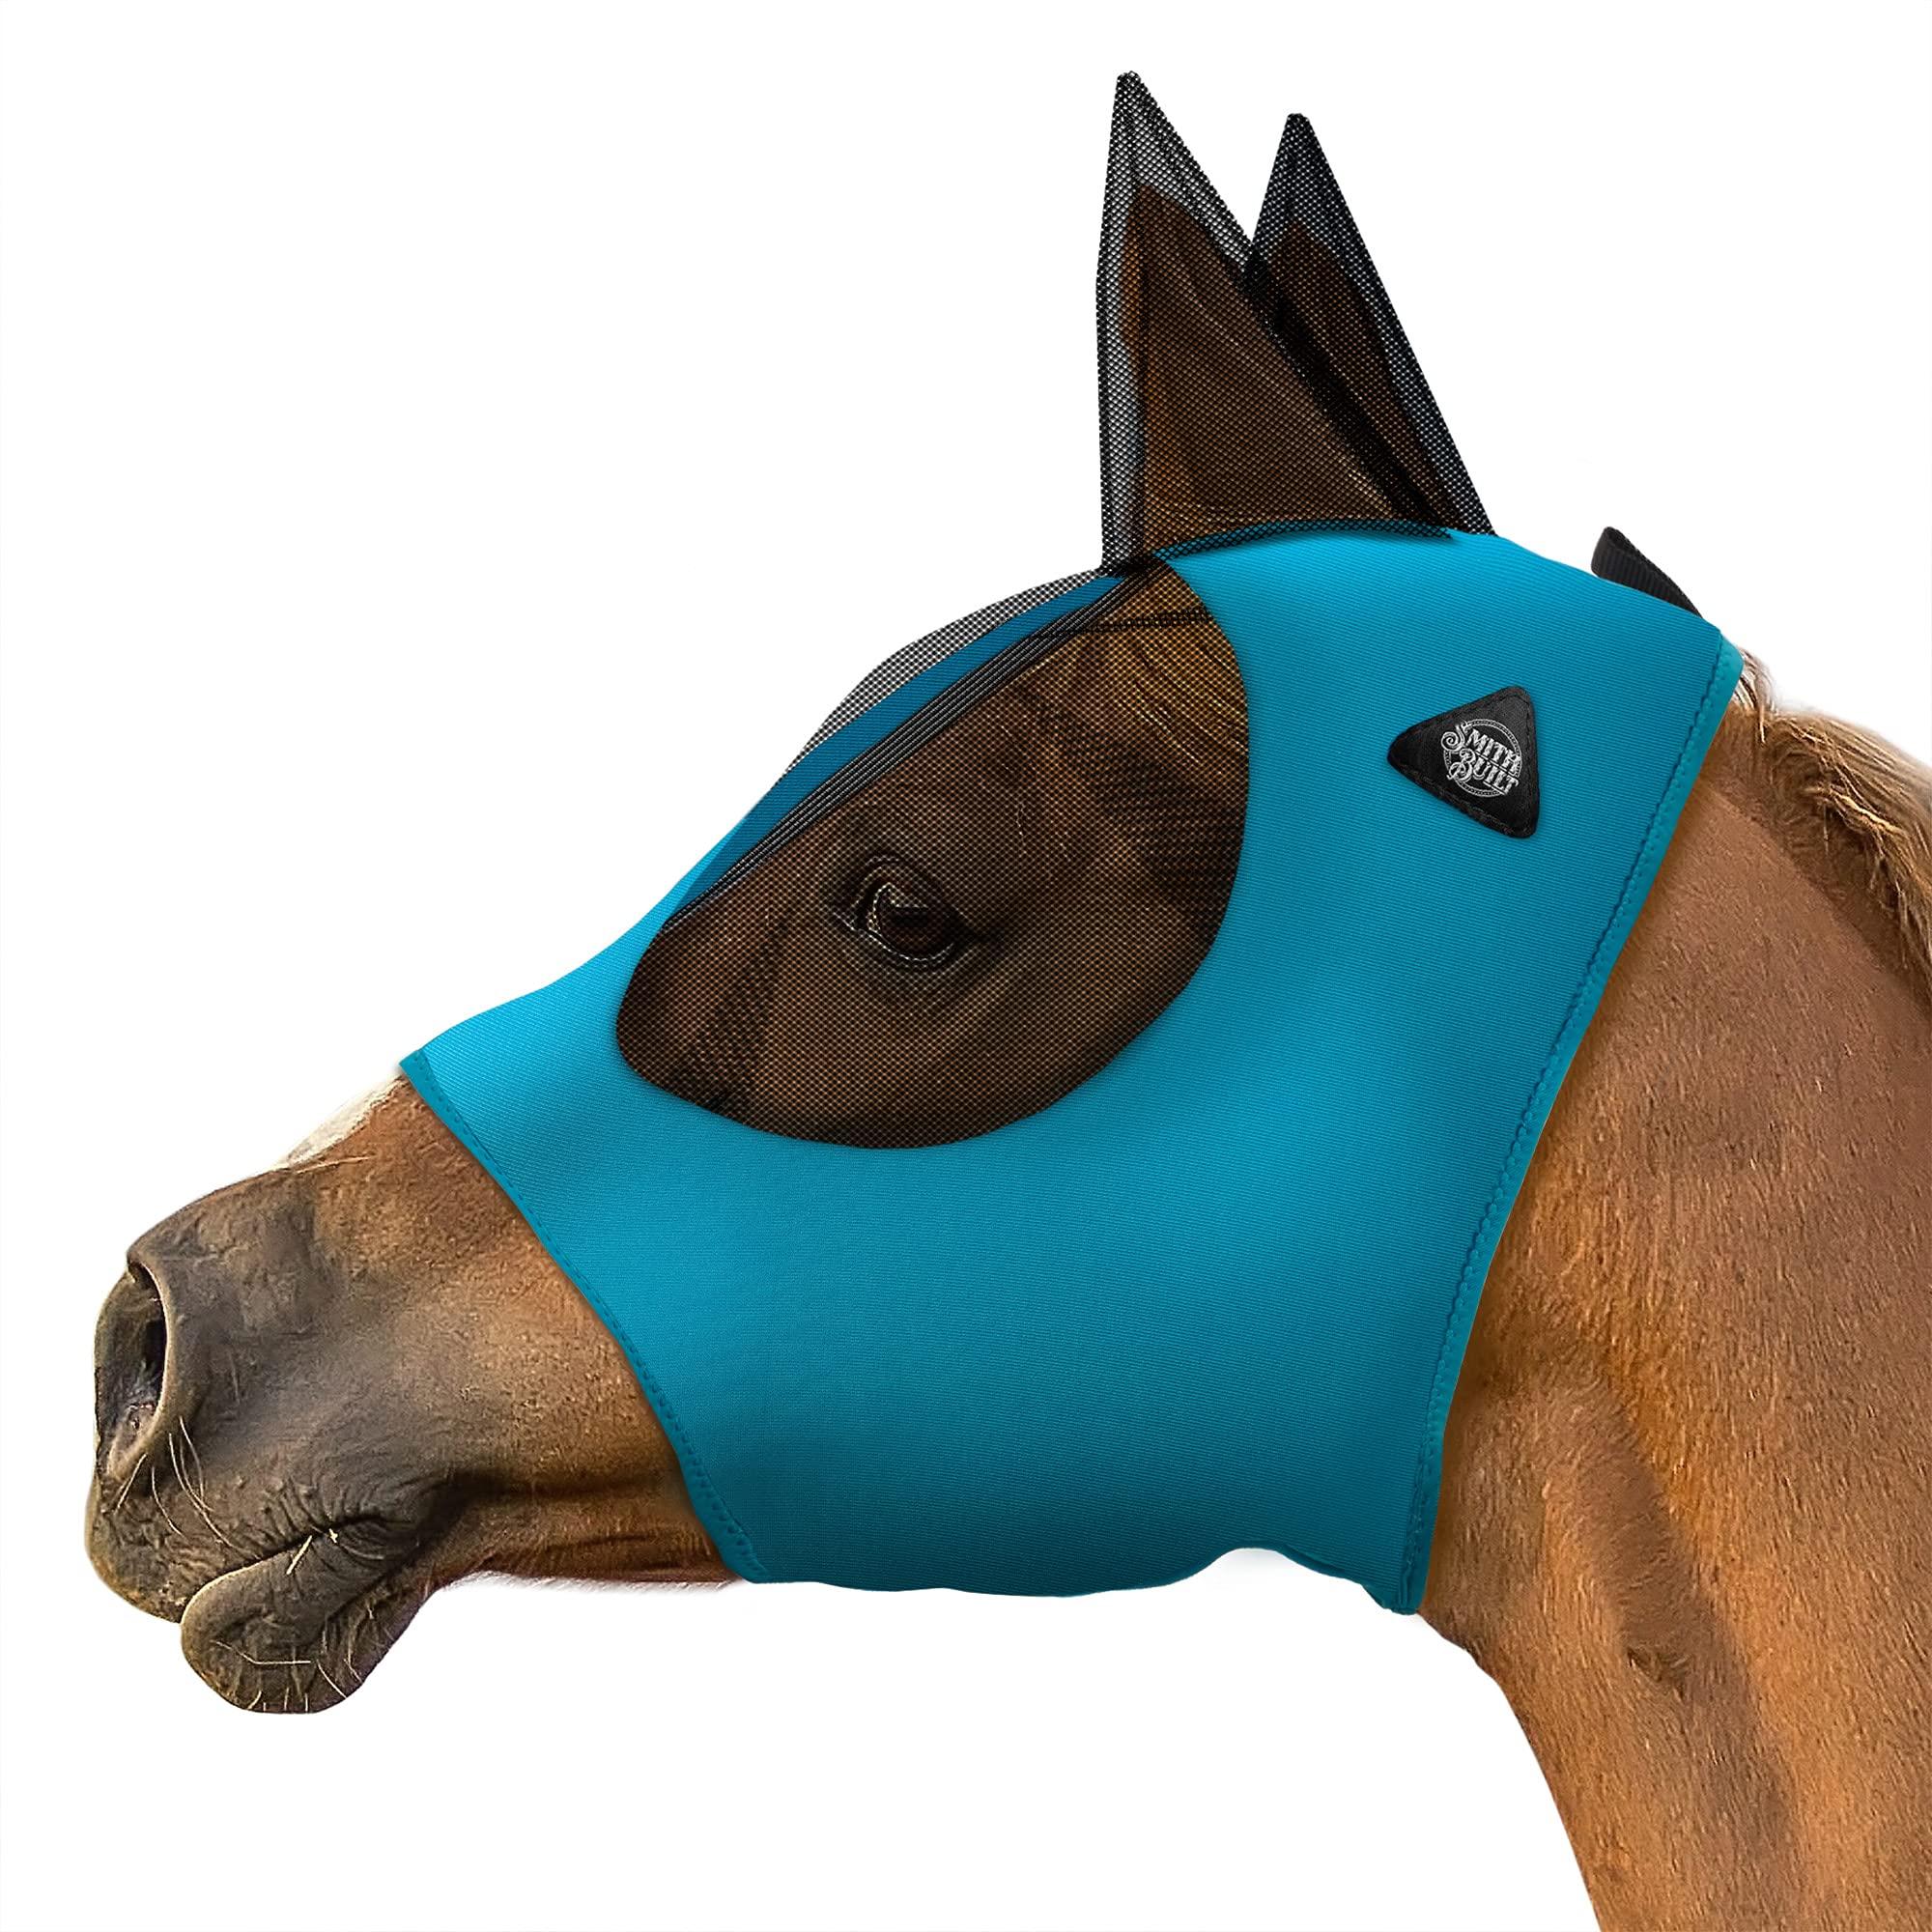 SmithBuilt Horse Fly Mask (Teal, Horse) - Mesh Eyes and Ears, Breathable Fabric, UV Protection